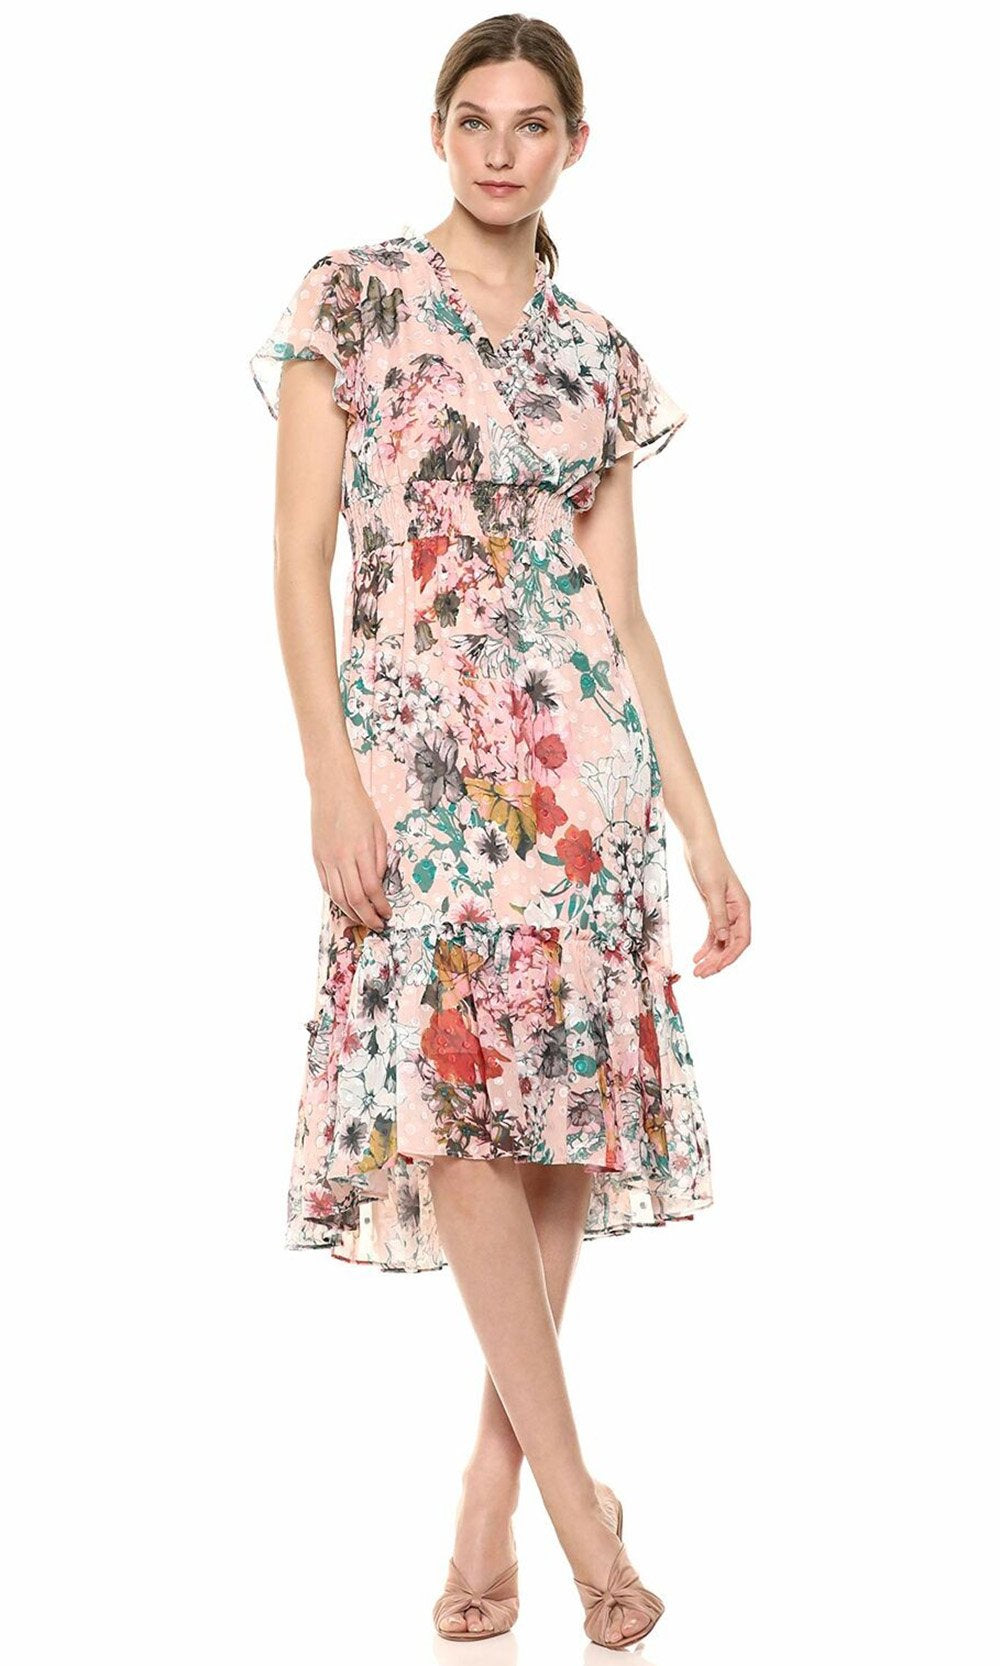 Gabby Skye - 18176M Smocked Waistband V Neck Floral Print Dress In Floral and Multi-Color